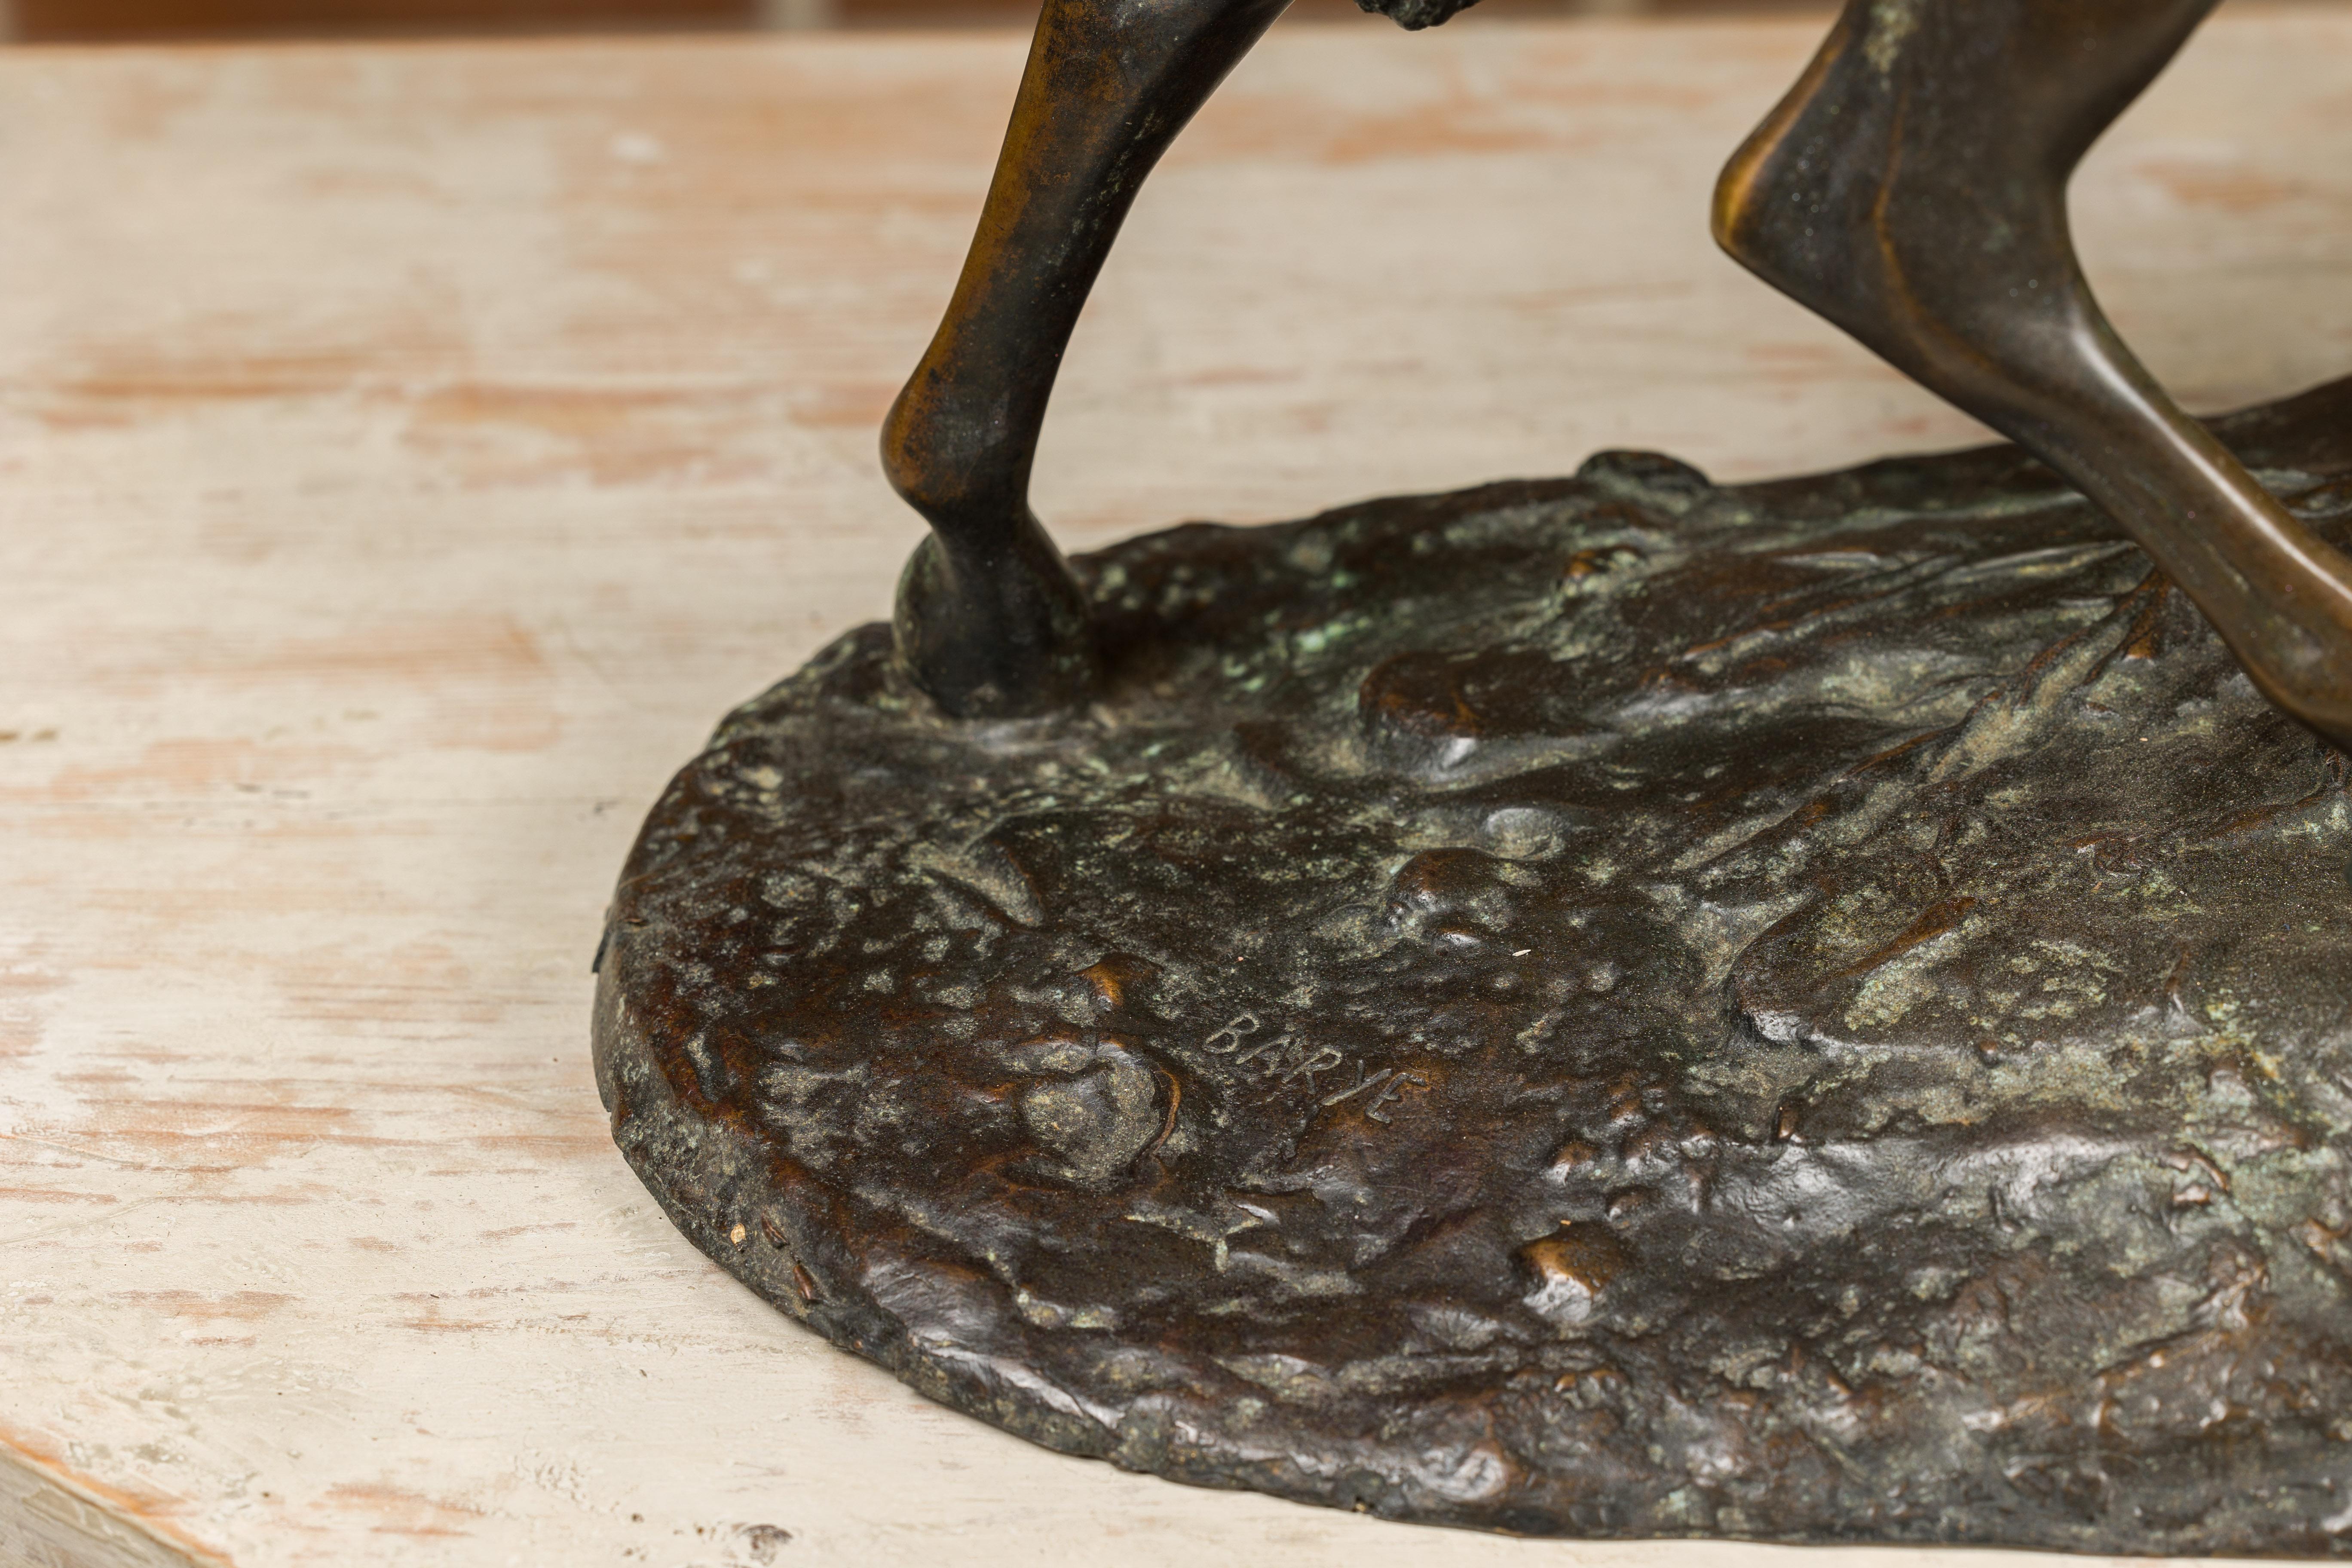 Antoine-Louis Barye Bronze Horse Sculpture with Left Foot Raised and Dark Patina For Sale 3